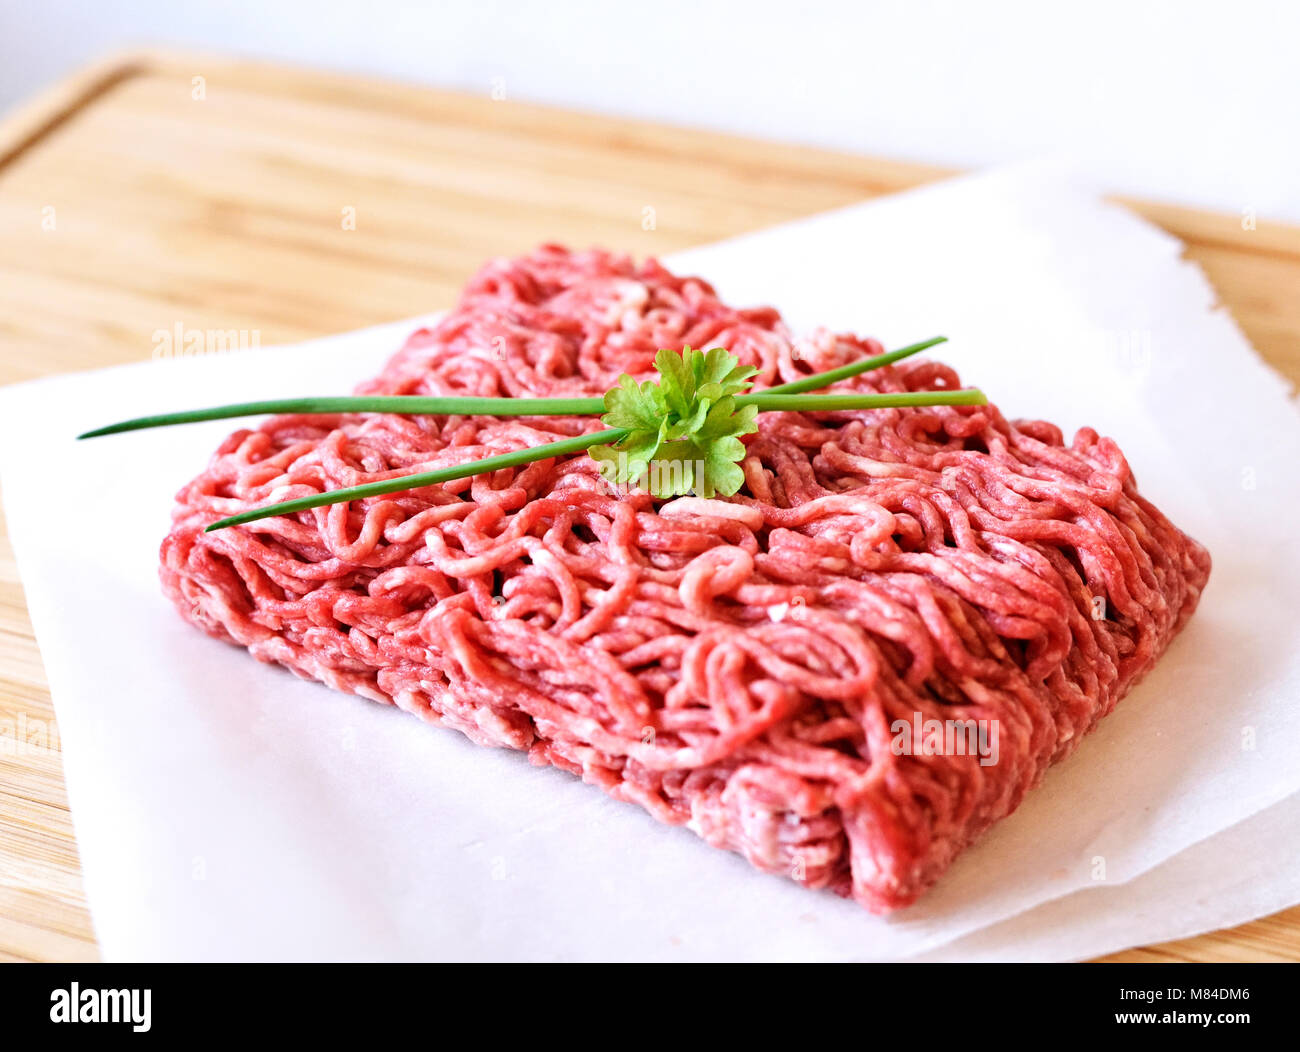 Raw minced meat or beef meat on a wooden cutting board. Fresh meat, cooking ingredient. high angle view. Stock Photo